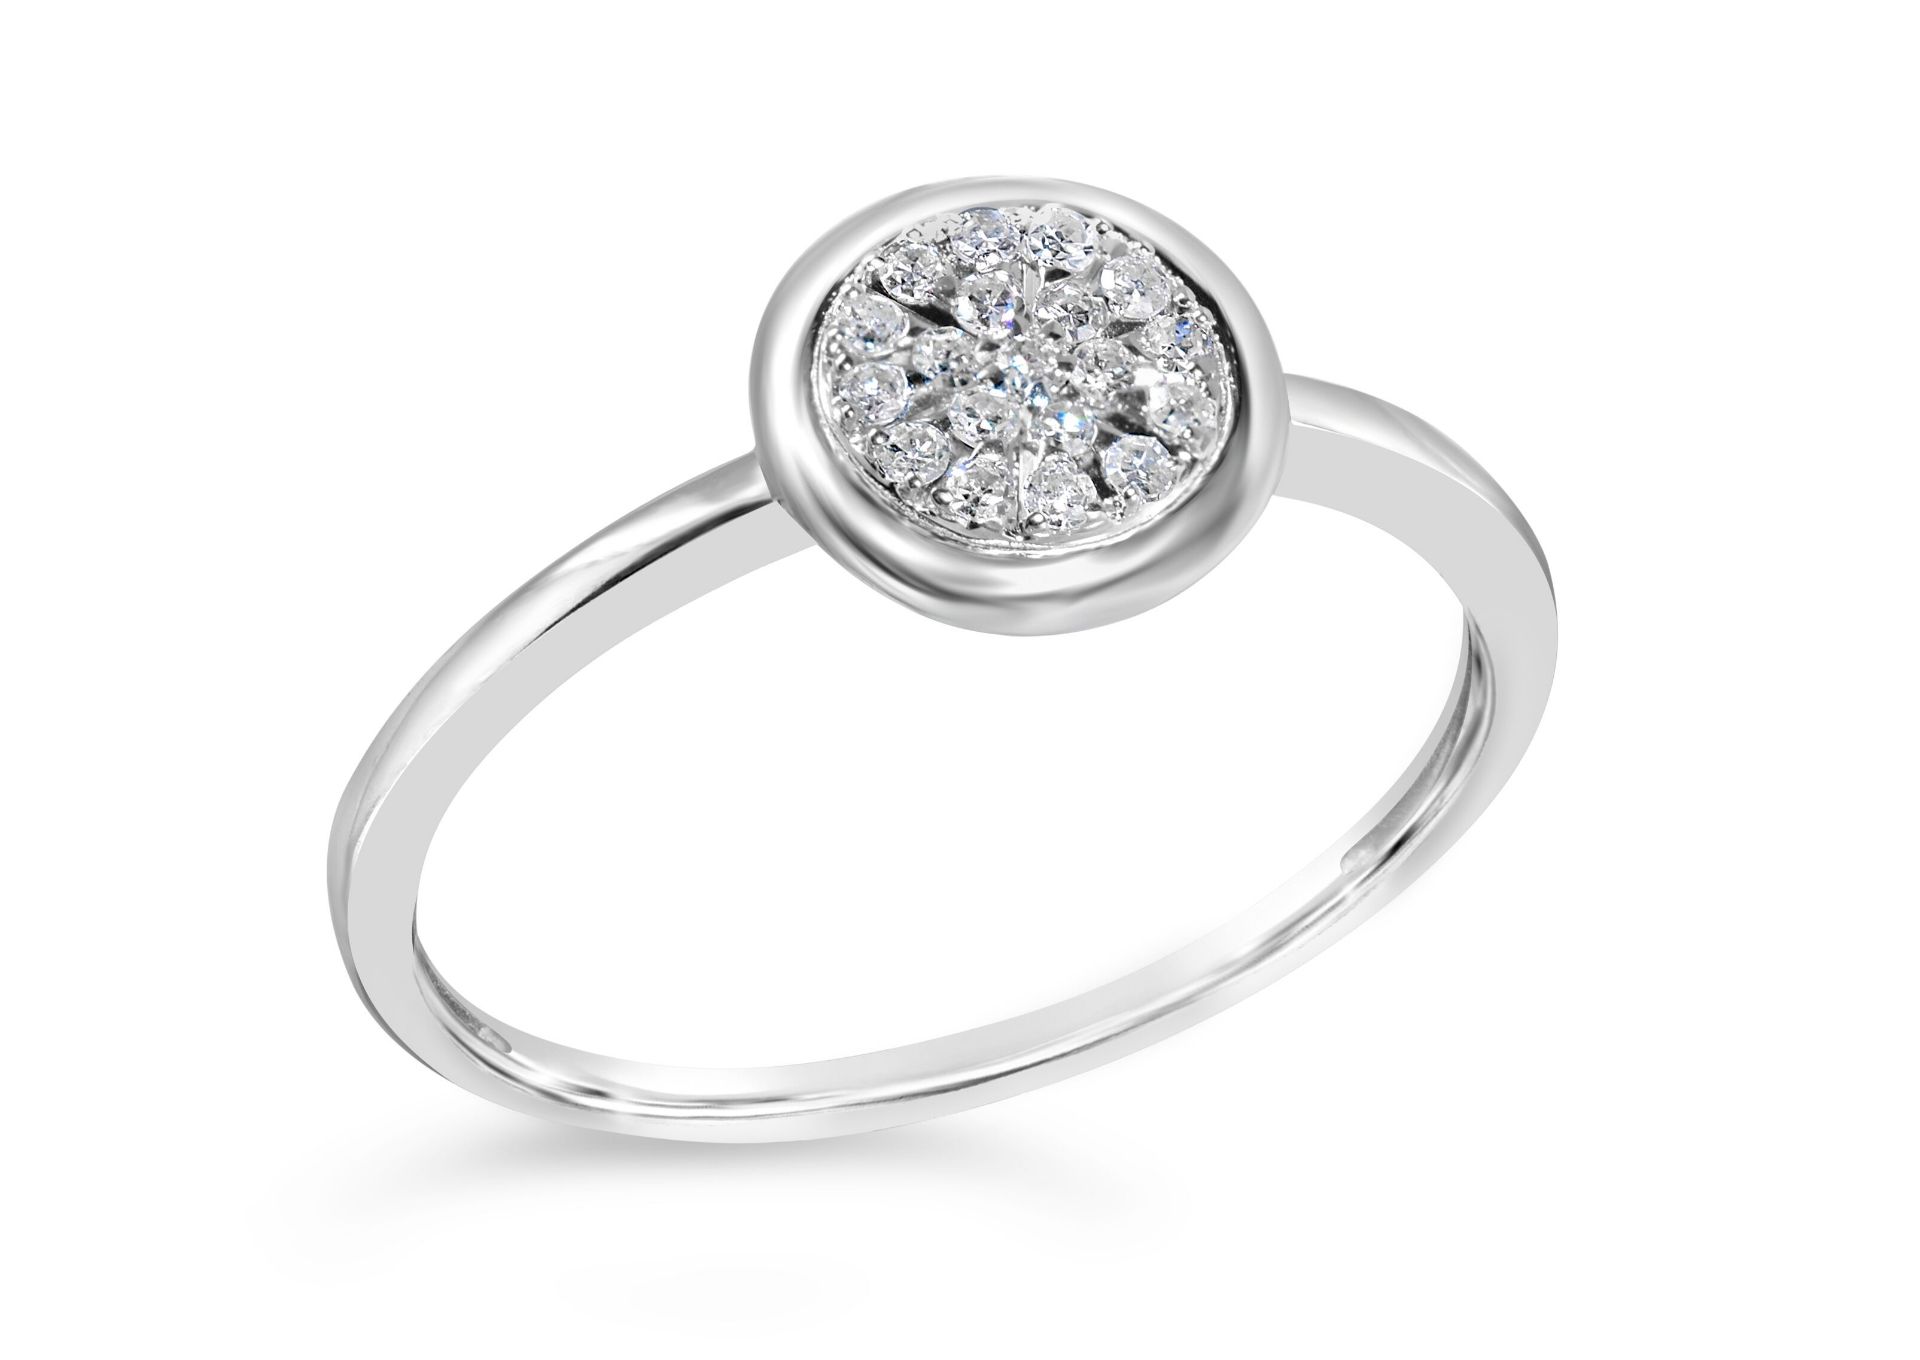 2 Carat Look Cluster Ring, 14ct White Gold RRP £699 Weight 1.7g, Diamond Weight 0.09ct, Colour H, - Image 3 of 3